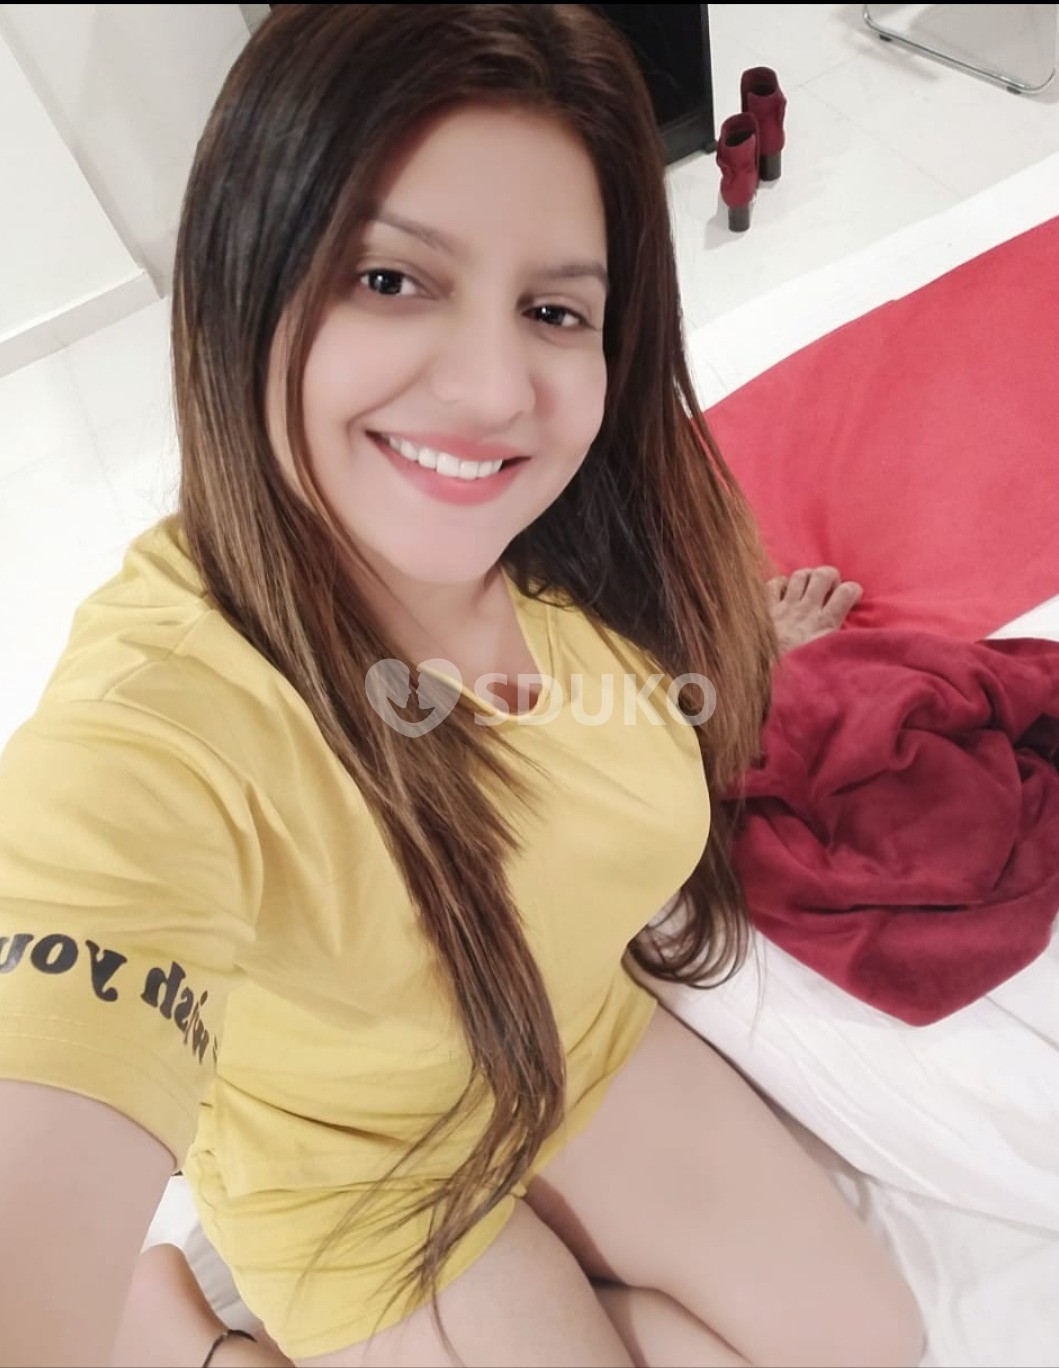 KONDHWA HOT HIGH PROFILE VIP CALL 24 X 7 HRS AVAILABLE ANAL ORAL BLOWJOB AVAILABLE ANYTIME CALL ME